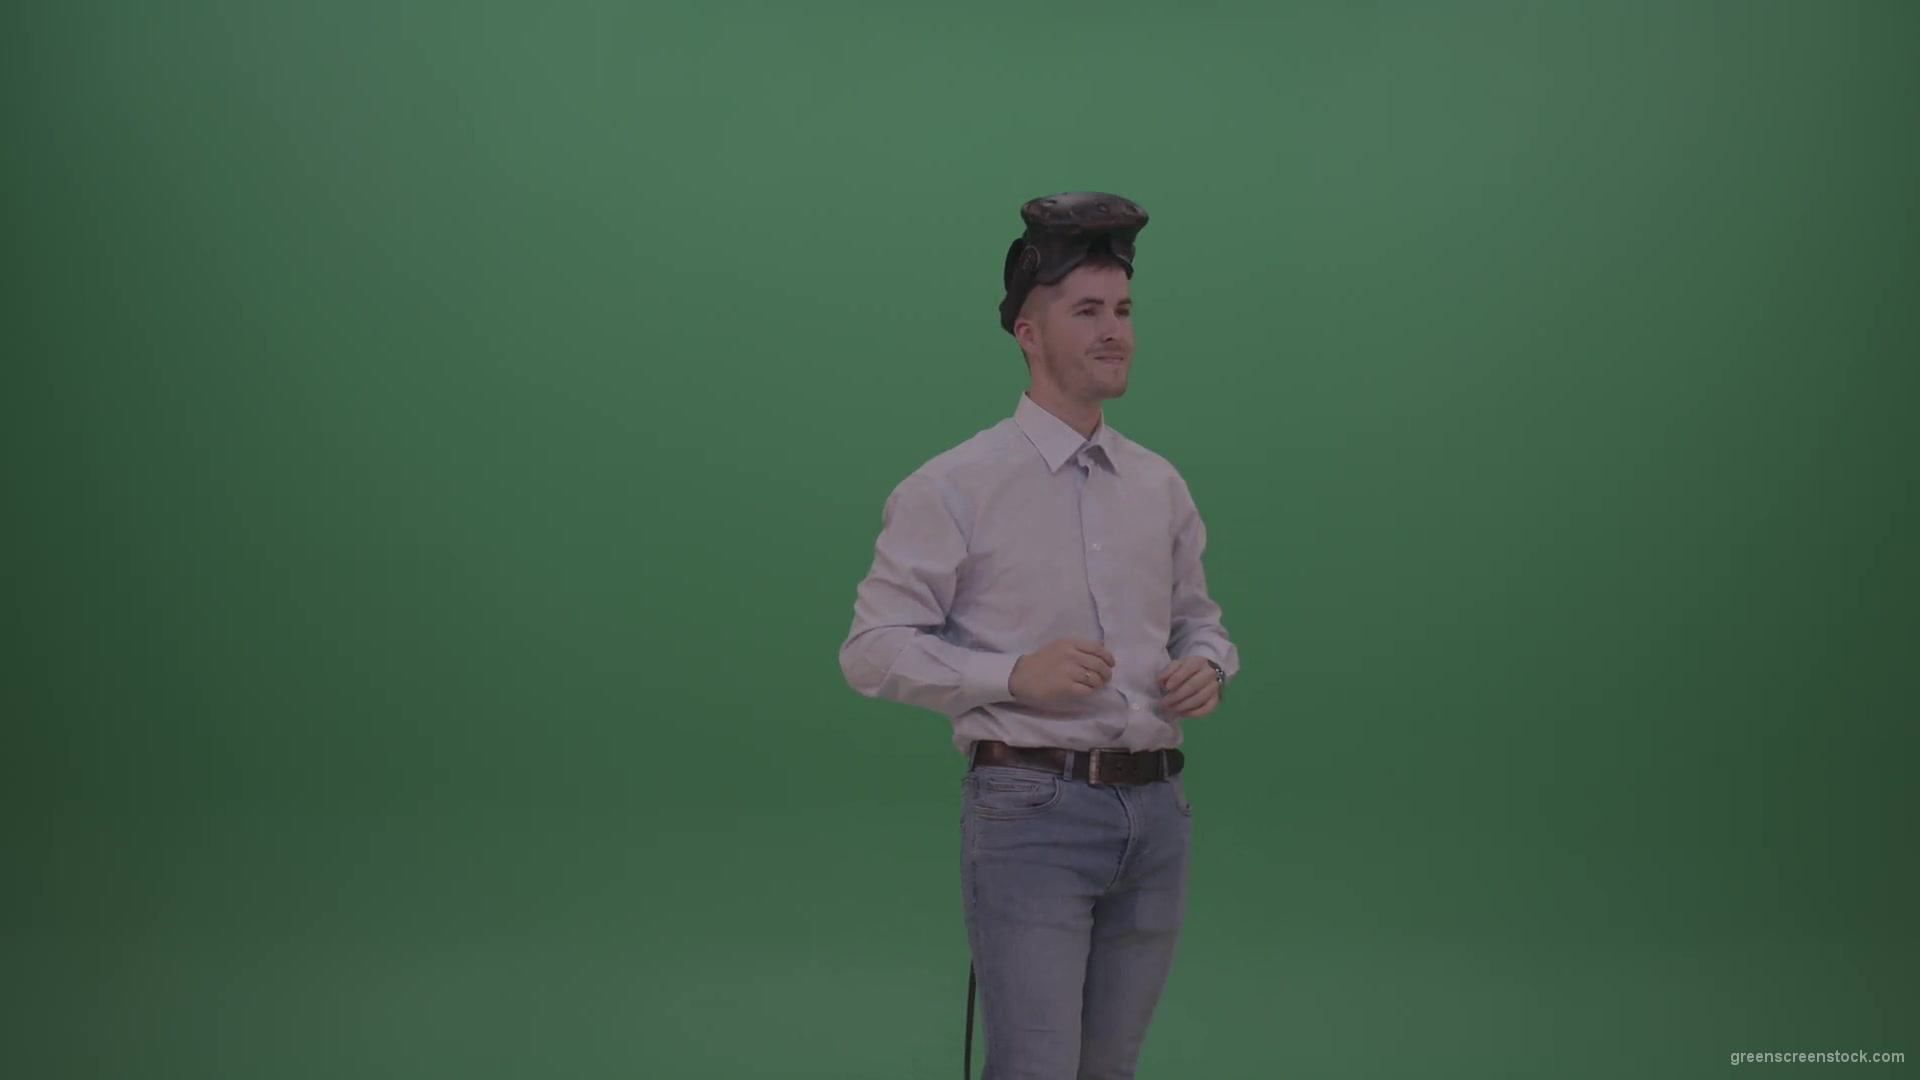 Young_Man_Wearing_White_Shirt_Making_Hard_Decision_Using_Virtual_Glasses_To_Solve_The_Task_Green_Screen_Wall_Chroma_Key_Background-1920_009 Green Screen Stock